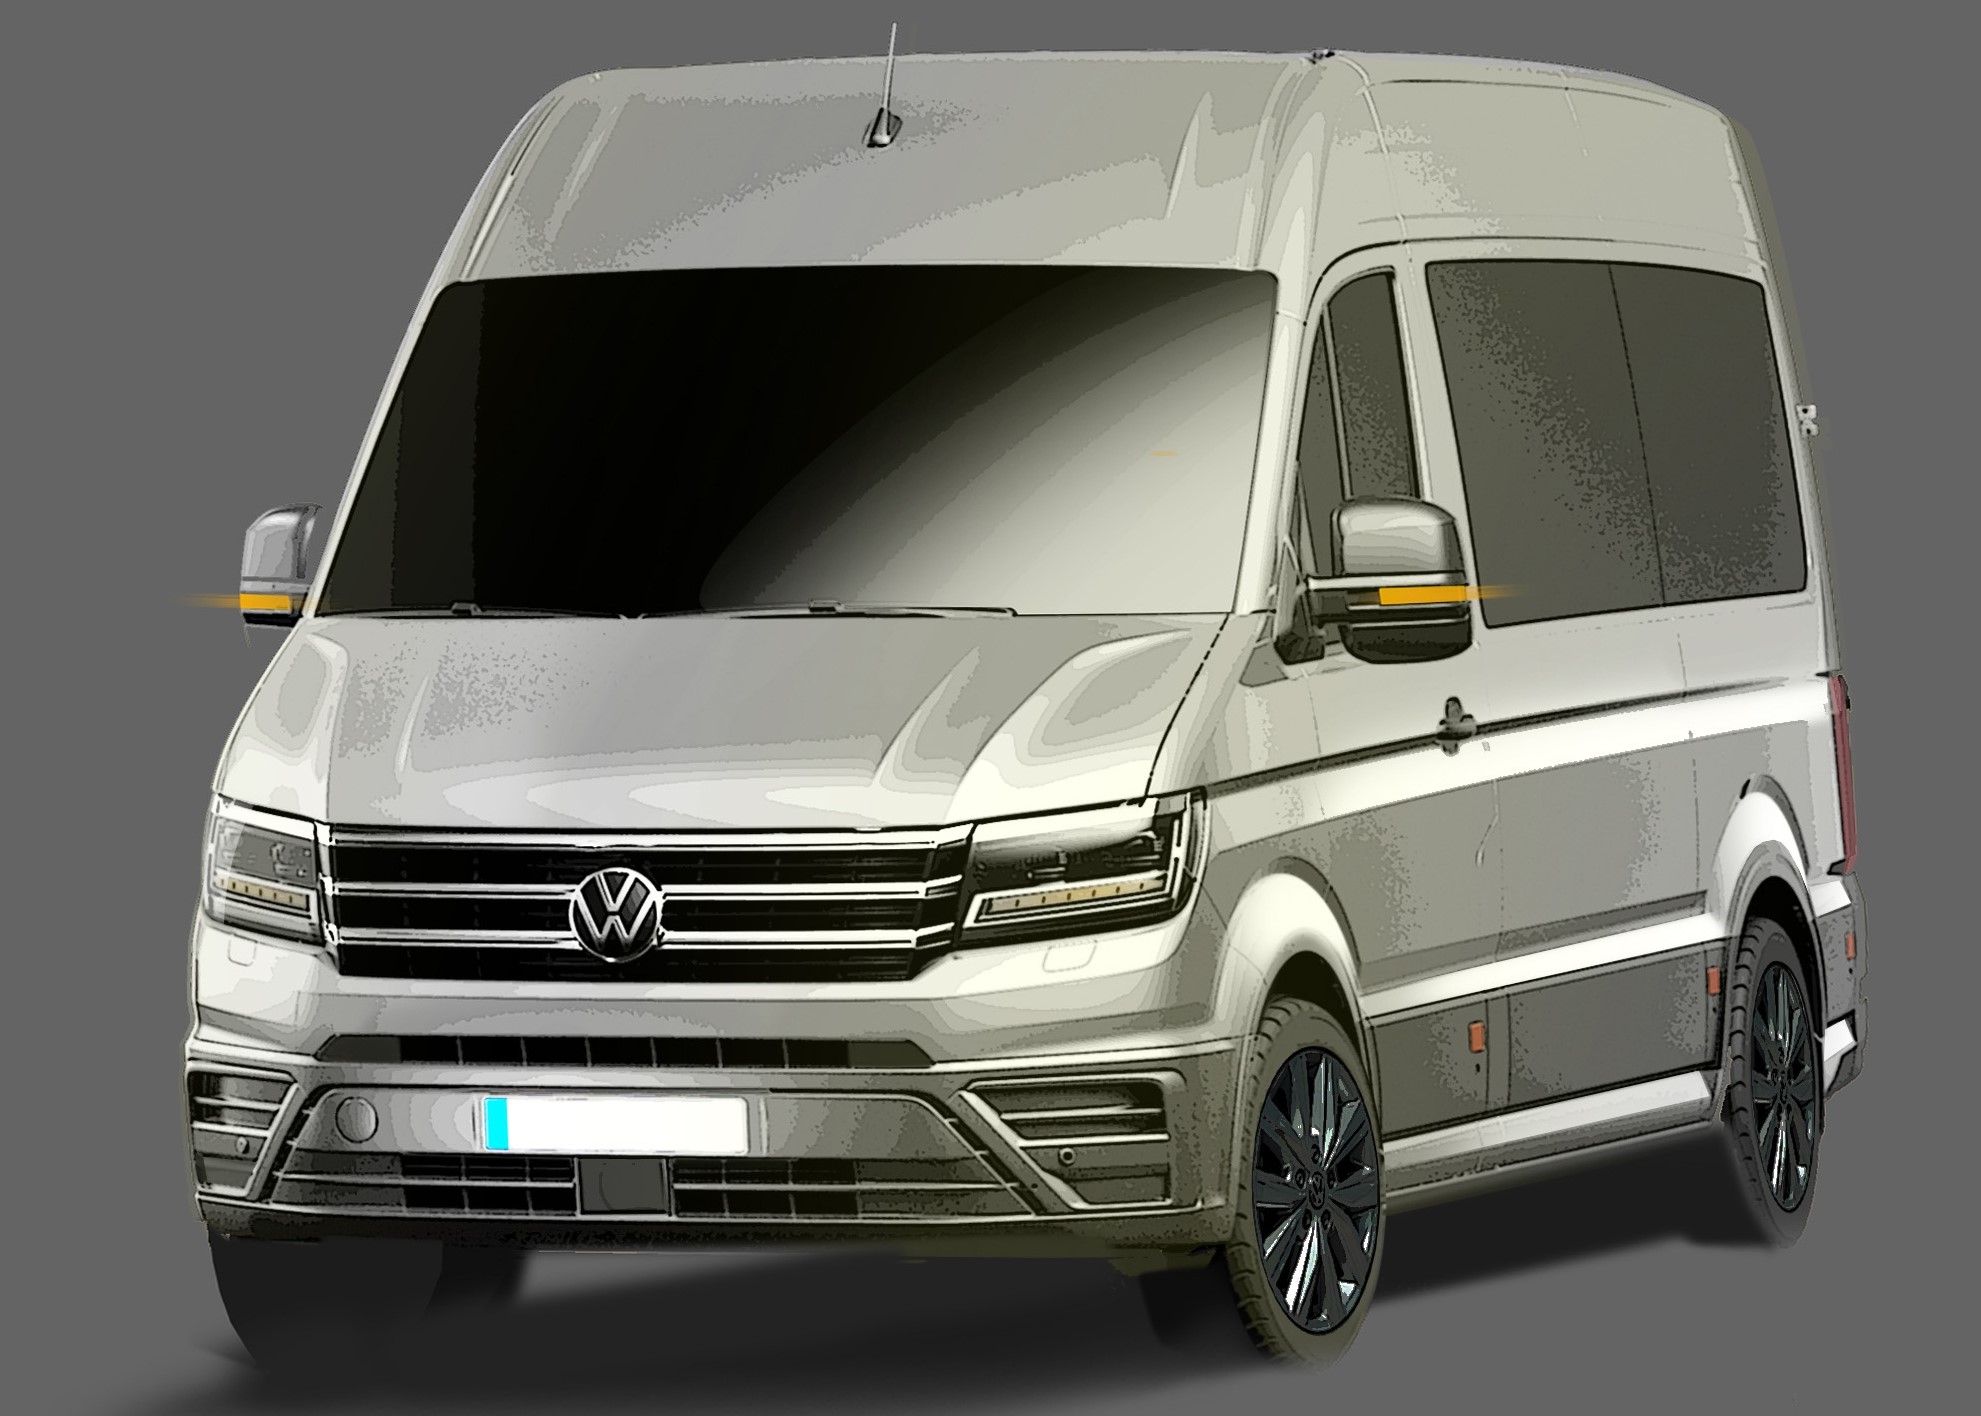 Volkswagen Crafter gets a major update for 2024 - CommercialVehicle.com